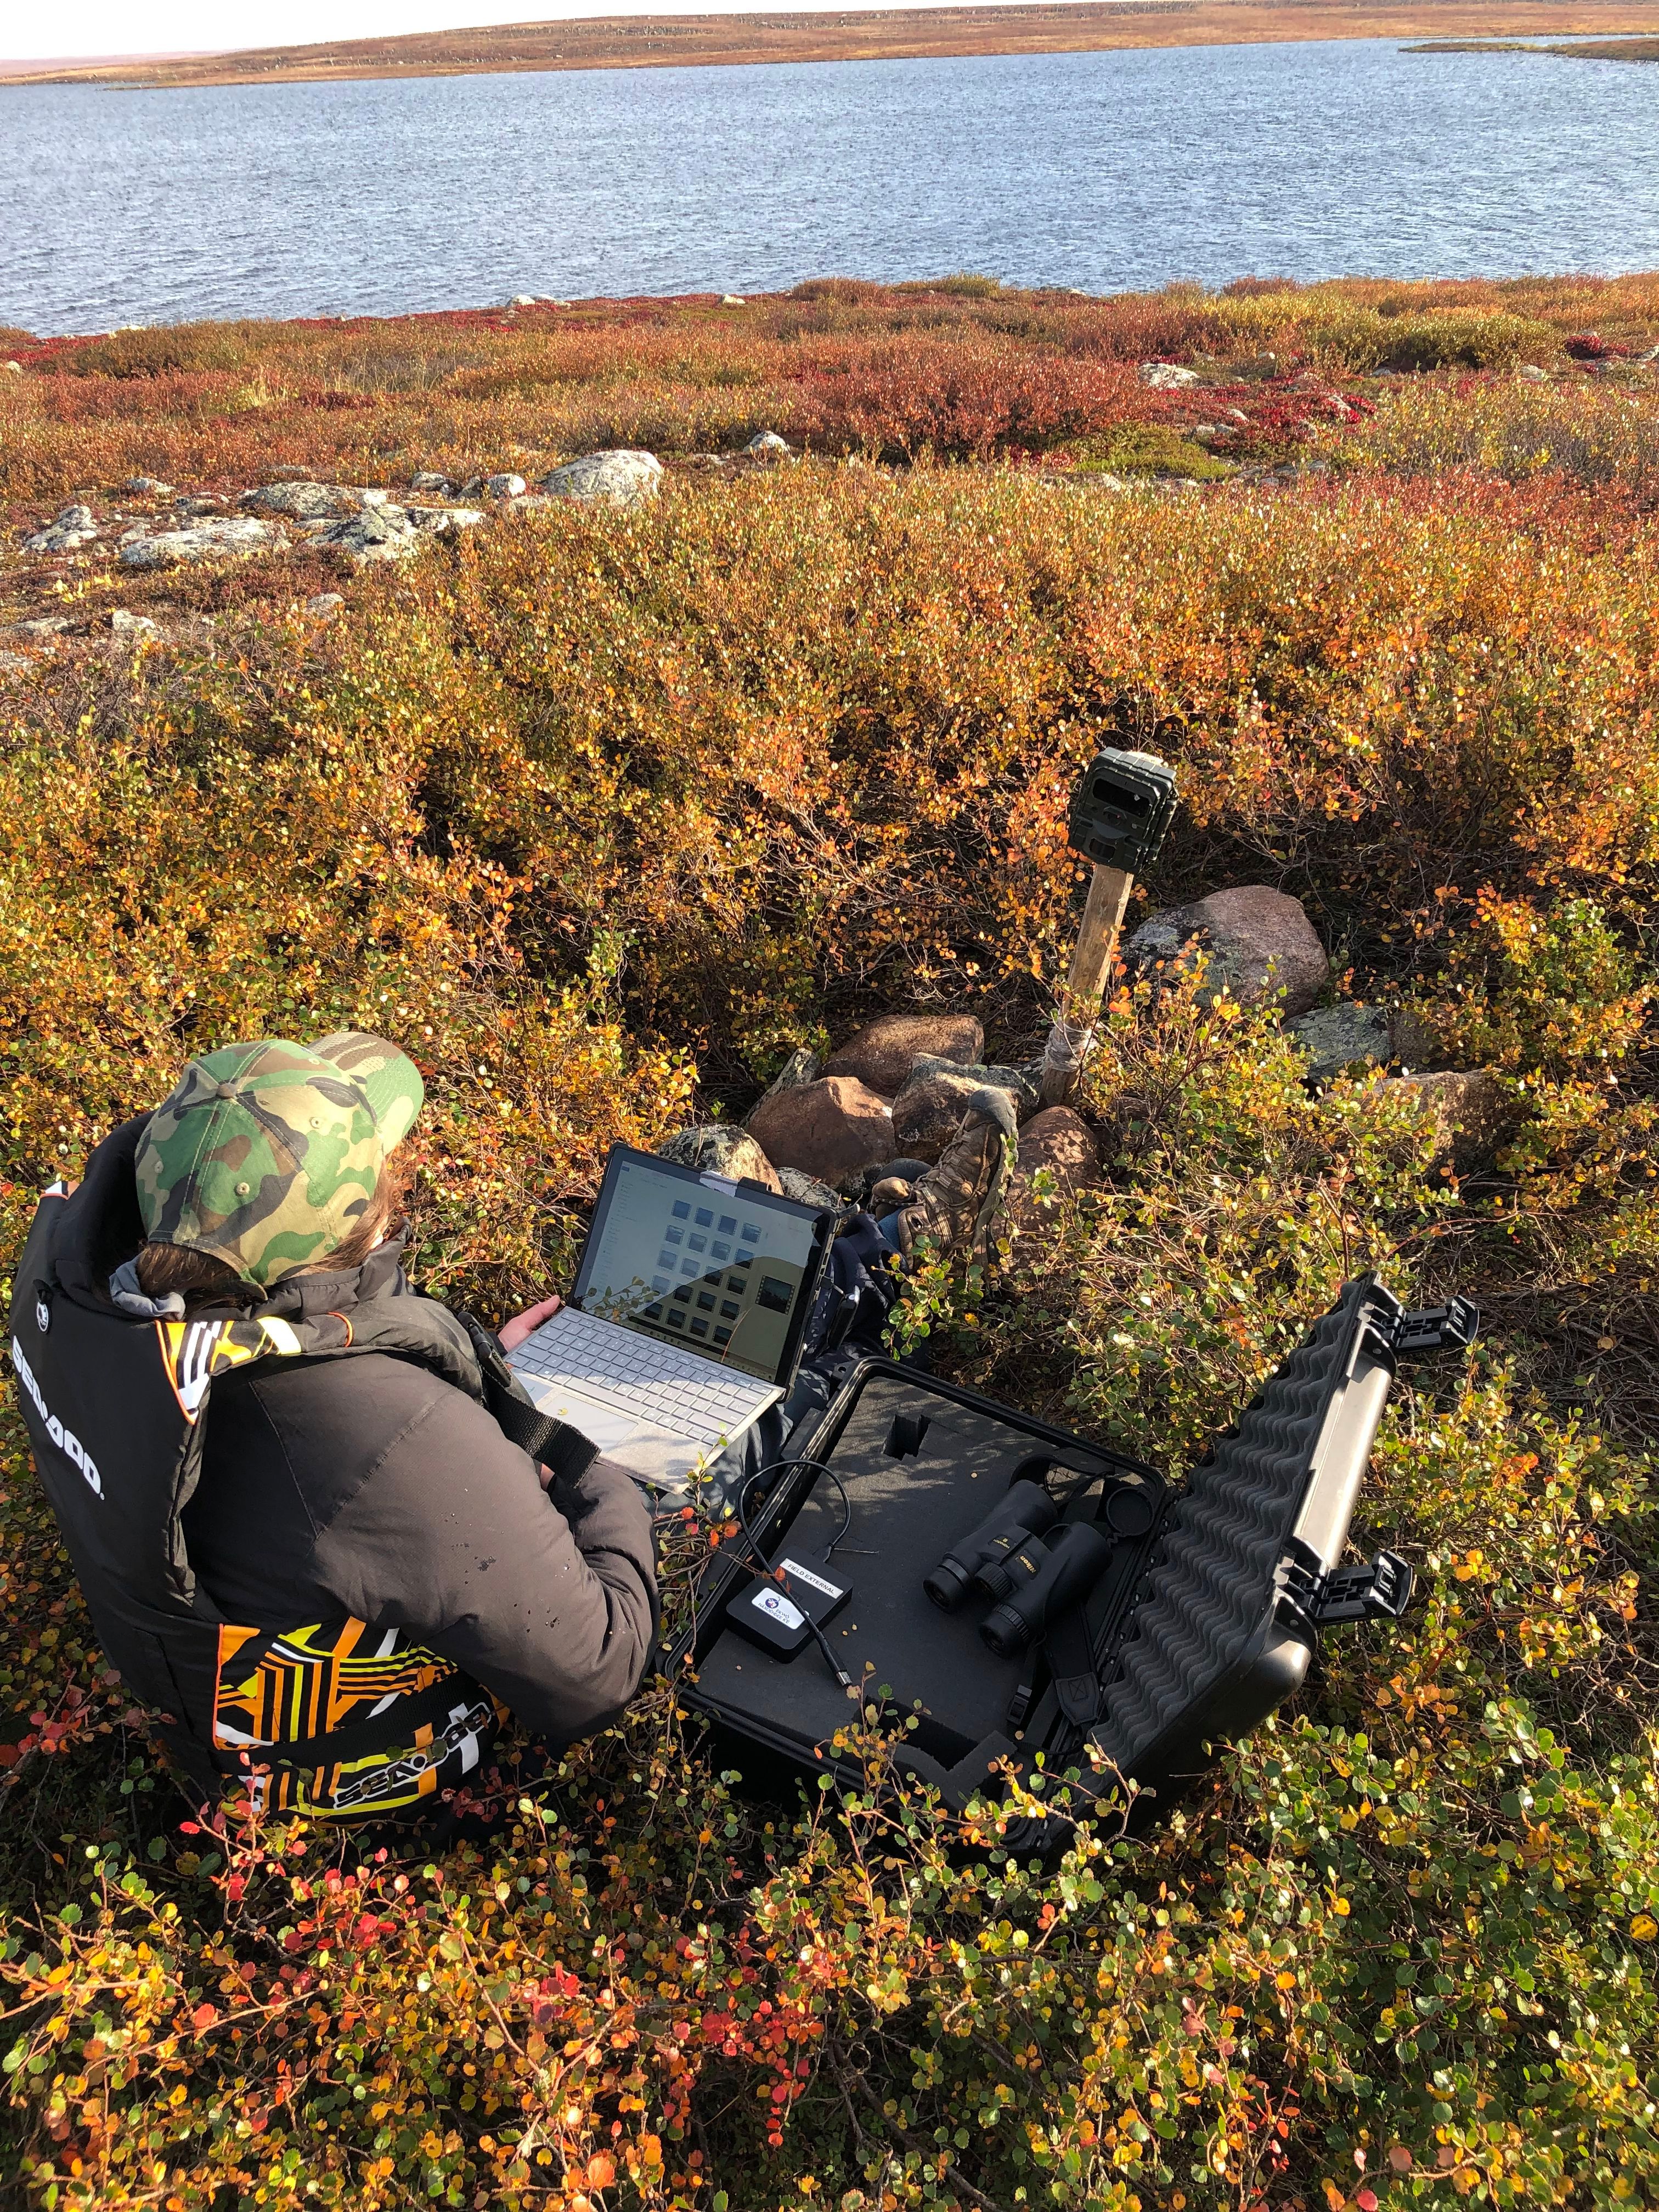 The WRRB’s Conservation Biologist, Aimee Guile, in her natural habitat – research. Photo credit: JJ Simpson 